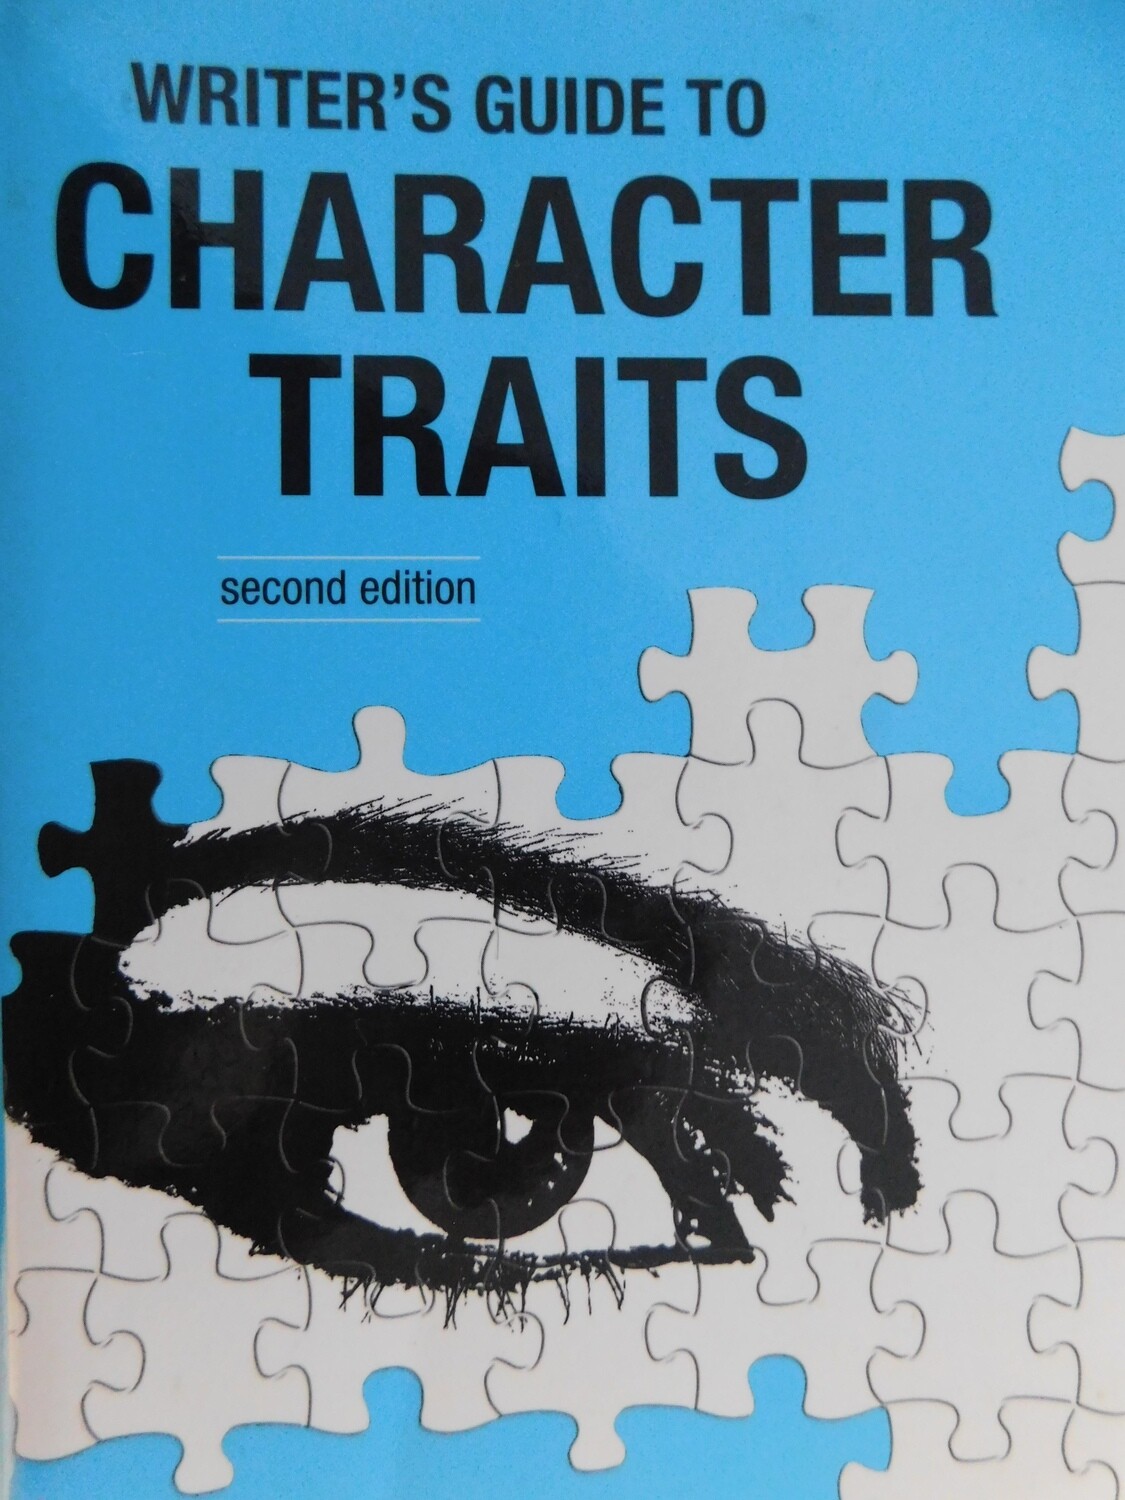 Writer's Guide to Character Traits